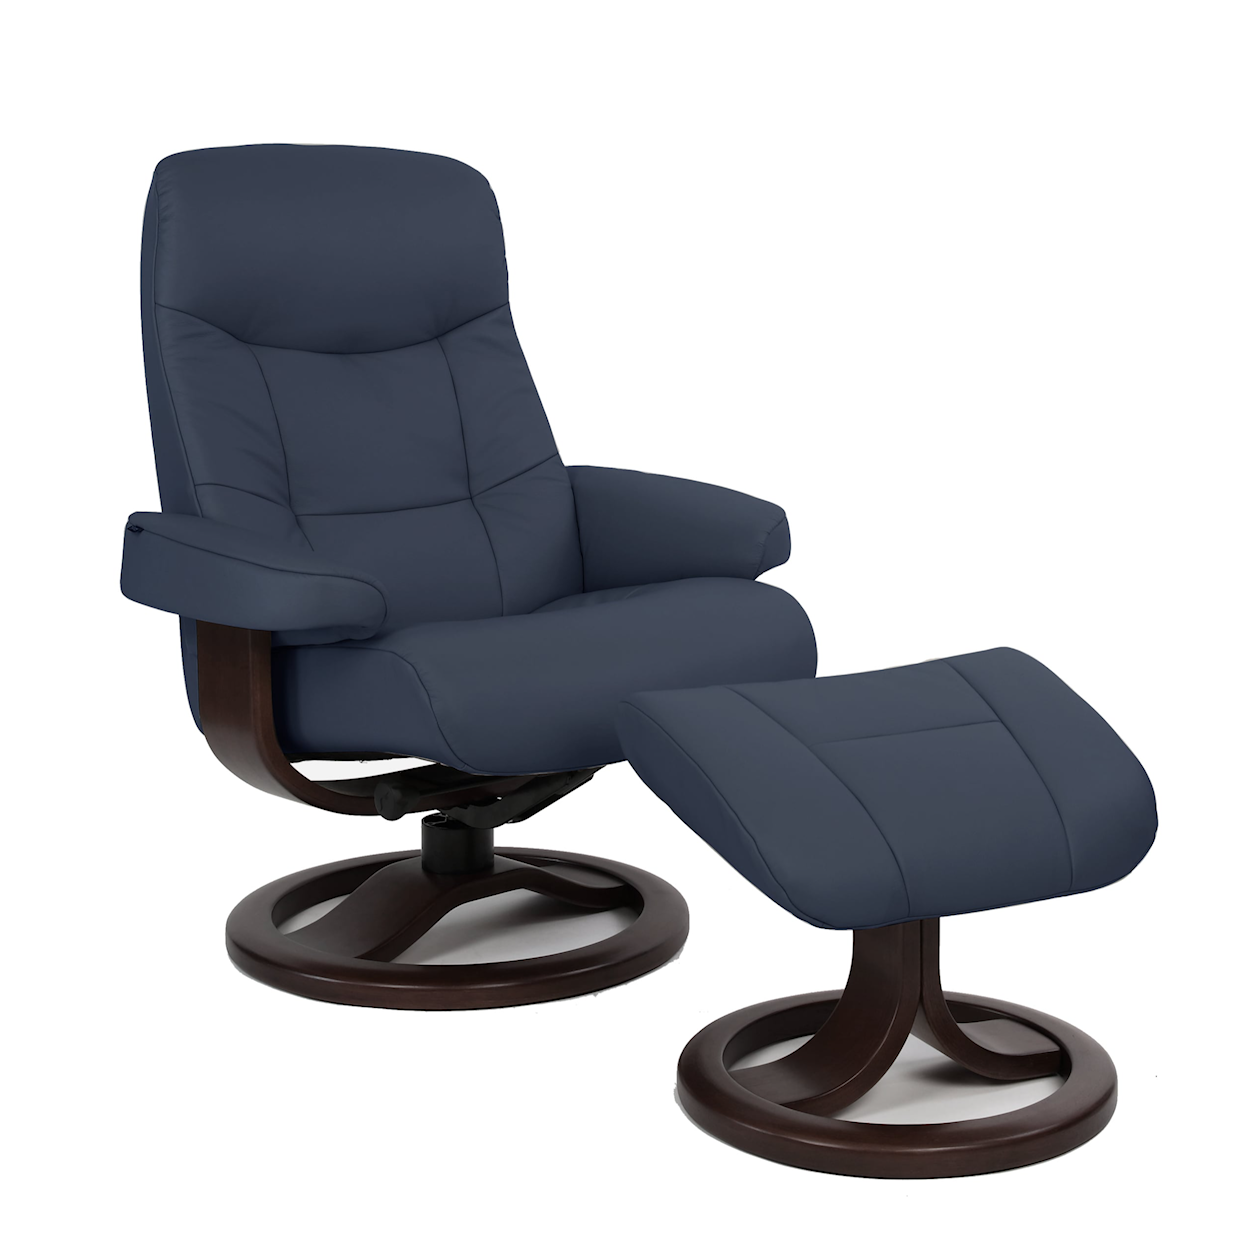 Fjords by Hjellegjerde Classic Comfort Collection Muldal R Small Manual Recliner W/ Footstool